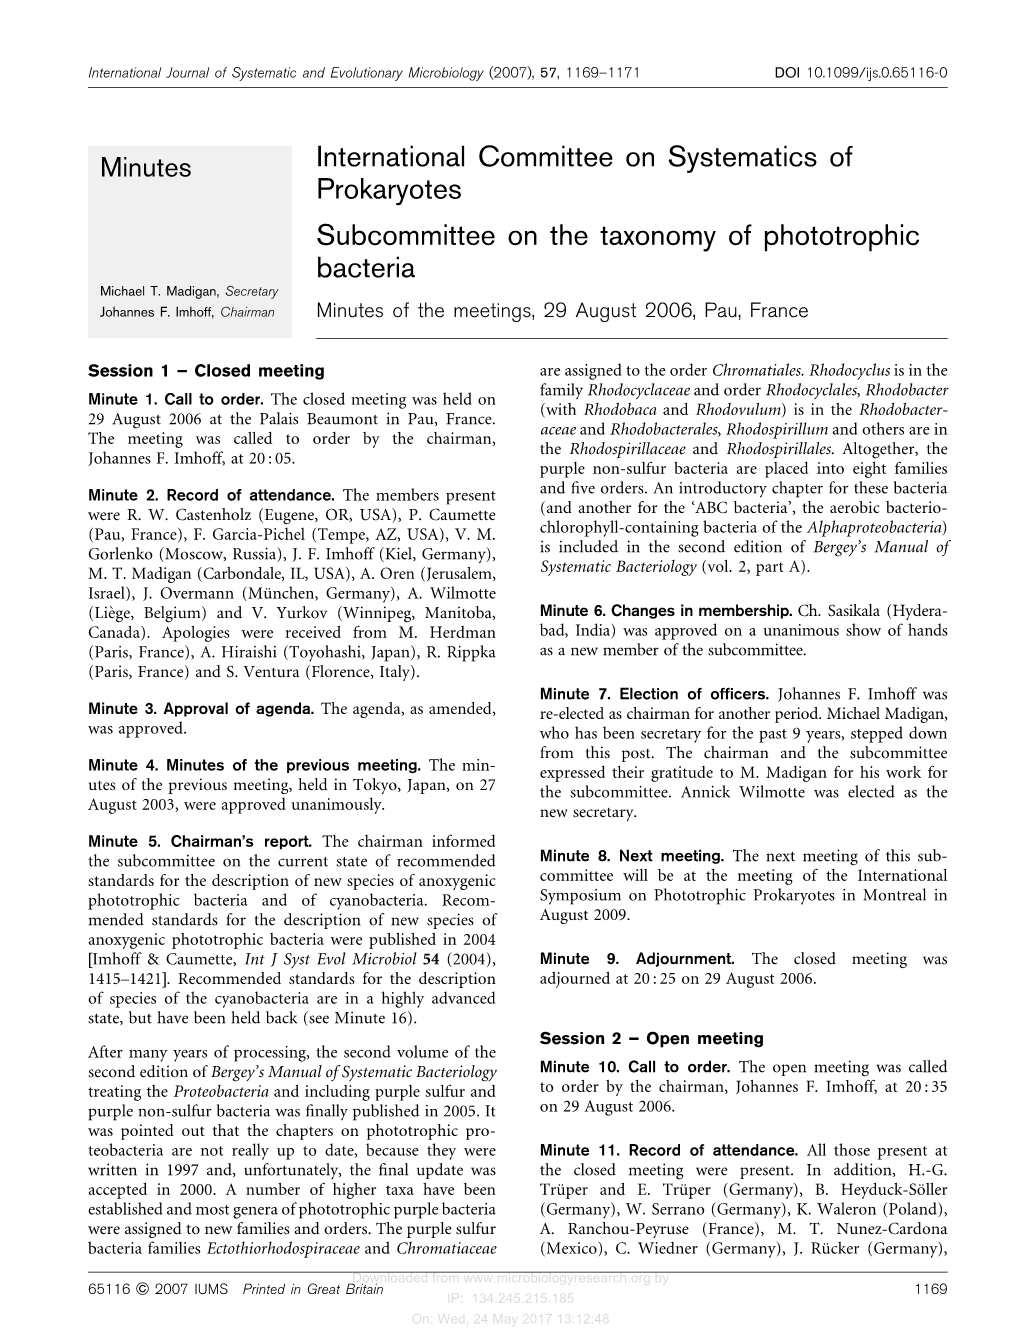 International Committee on Systematics of Prokaryotes Subcommittee on the Taxonomy of Phototrophic Bacteria Michael T